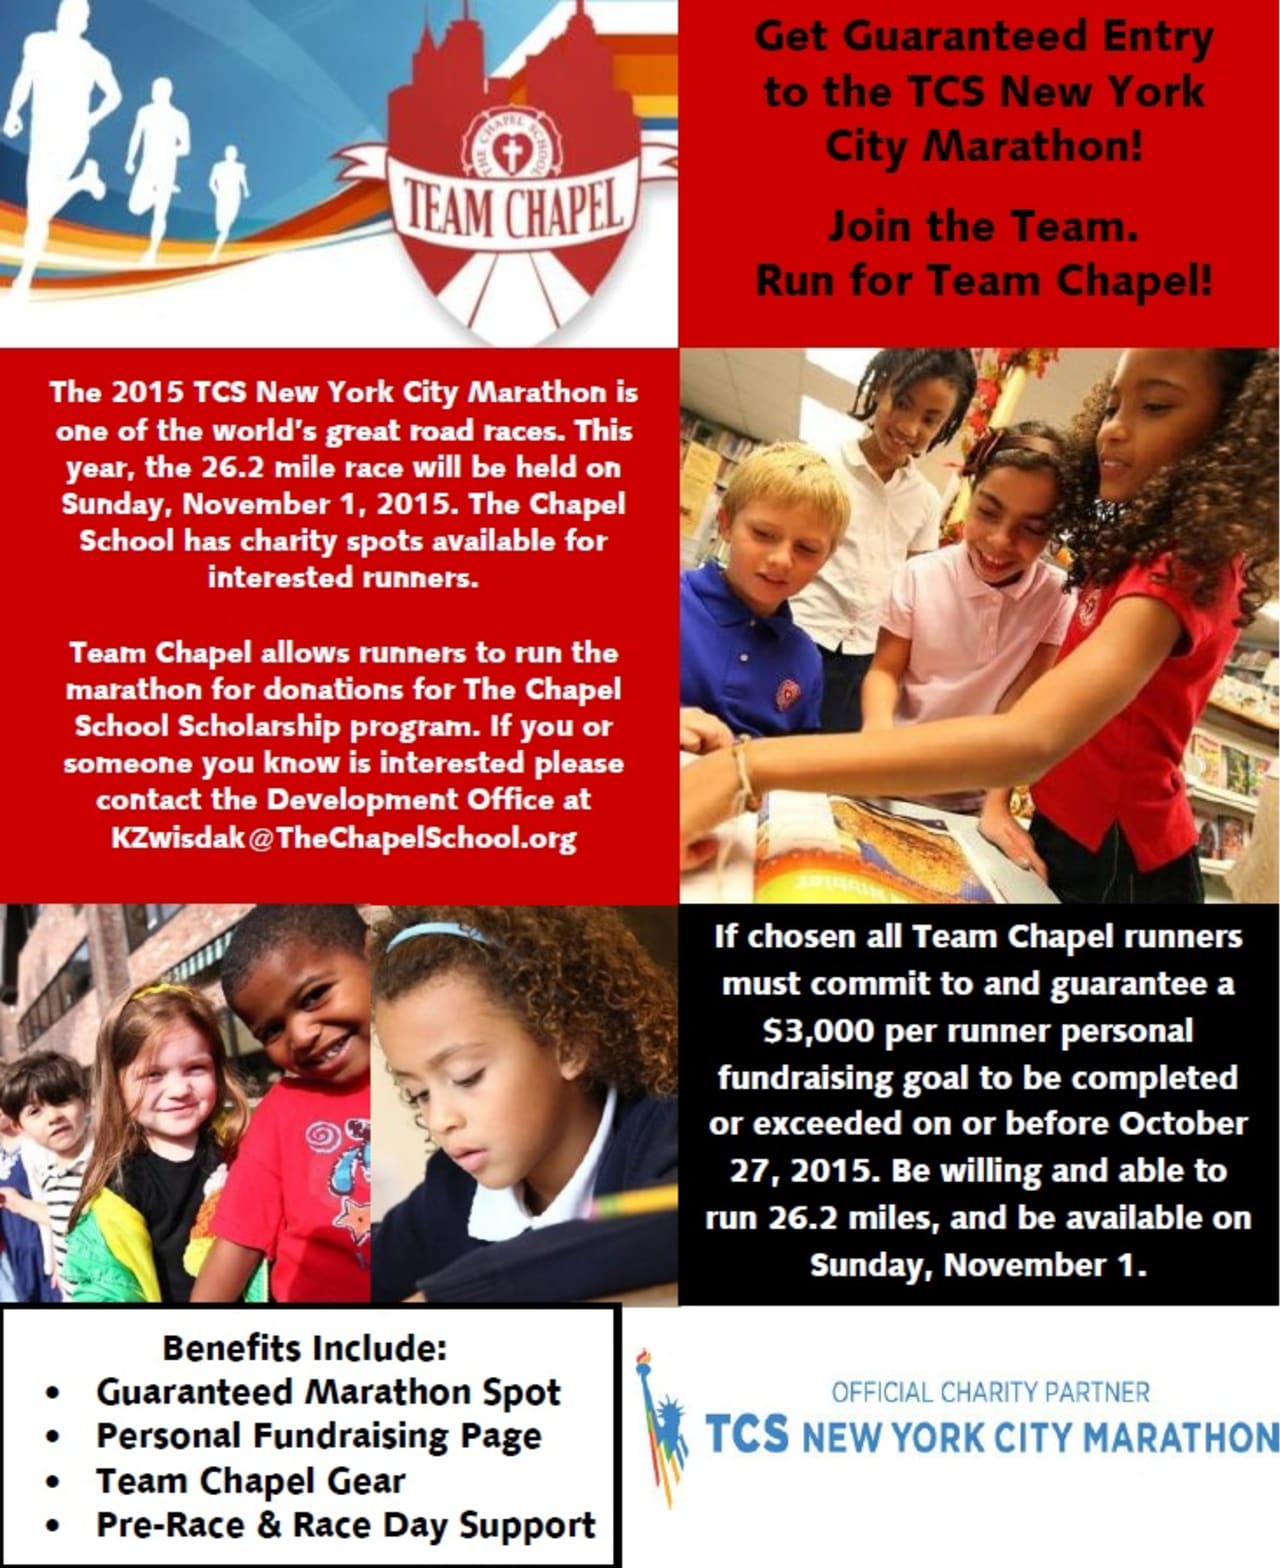 The Chapel School in Bronxville recently was named an official charity partner of the 2015 TCS New York City Marathon, according to a press release.